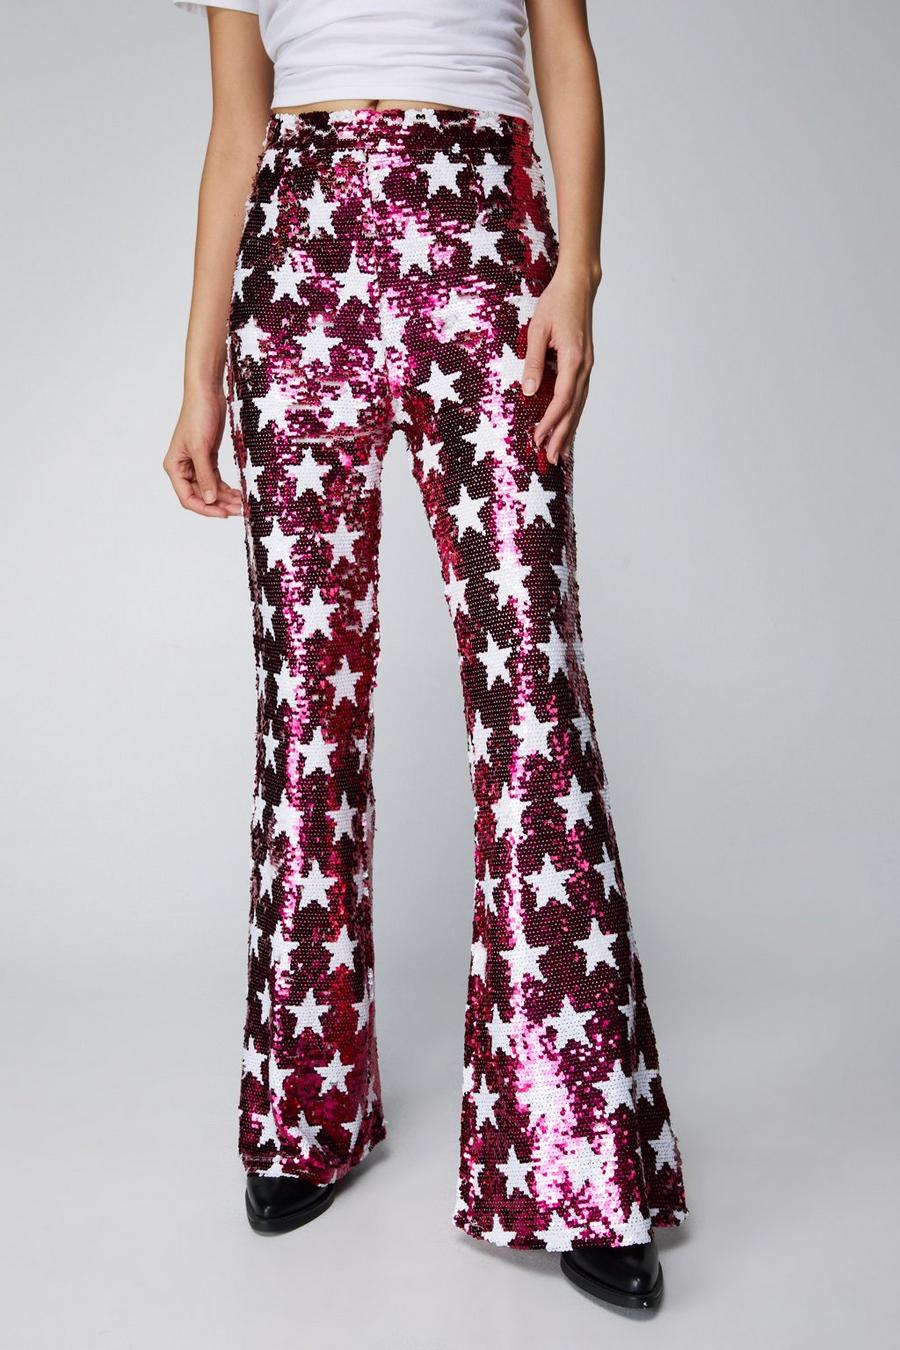  HCNTES Bell Bottoms Sparkly Flare Pants for Women